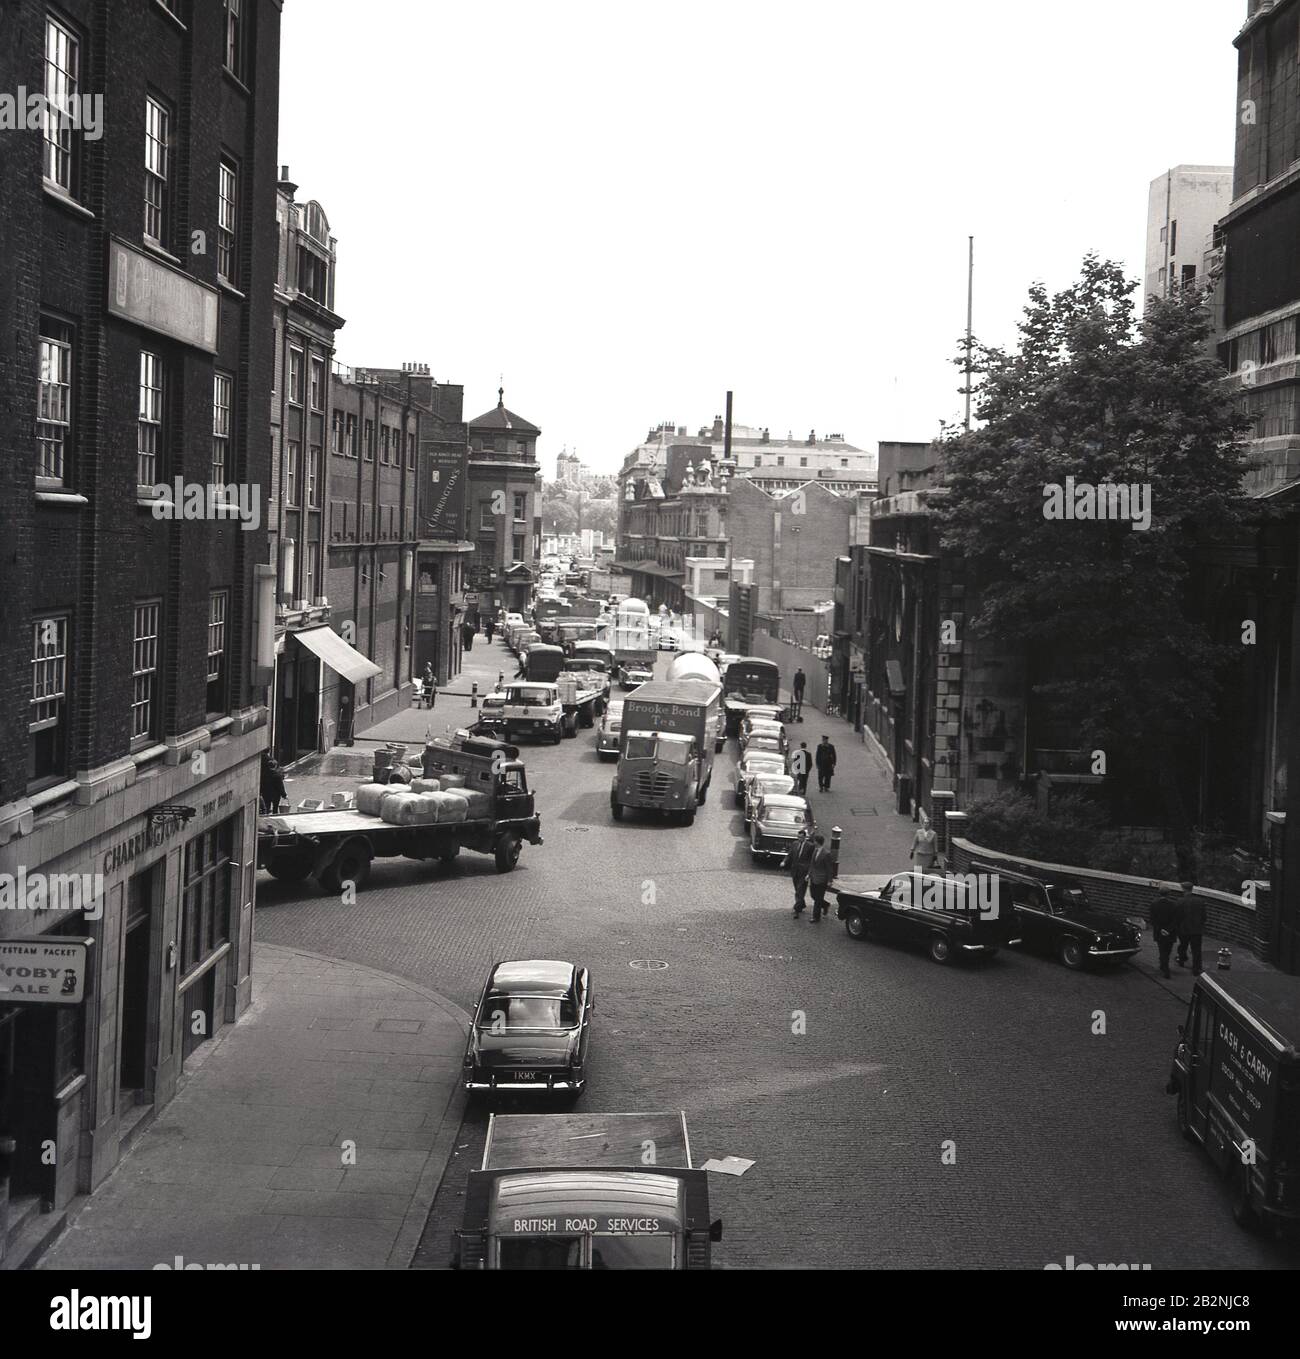 1960s, historical, a view down Thames Street, City of London, showing vehicles of the day, delivery trucks and a Charrington's pub, selling Toby Ales, England, UK. Divided into Lower and Upper Thames Street goes along the River Thames from Westminster to Tower Hill. Stock Photo